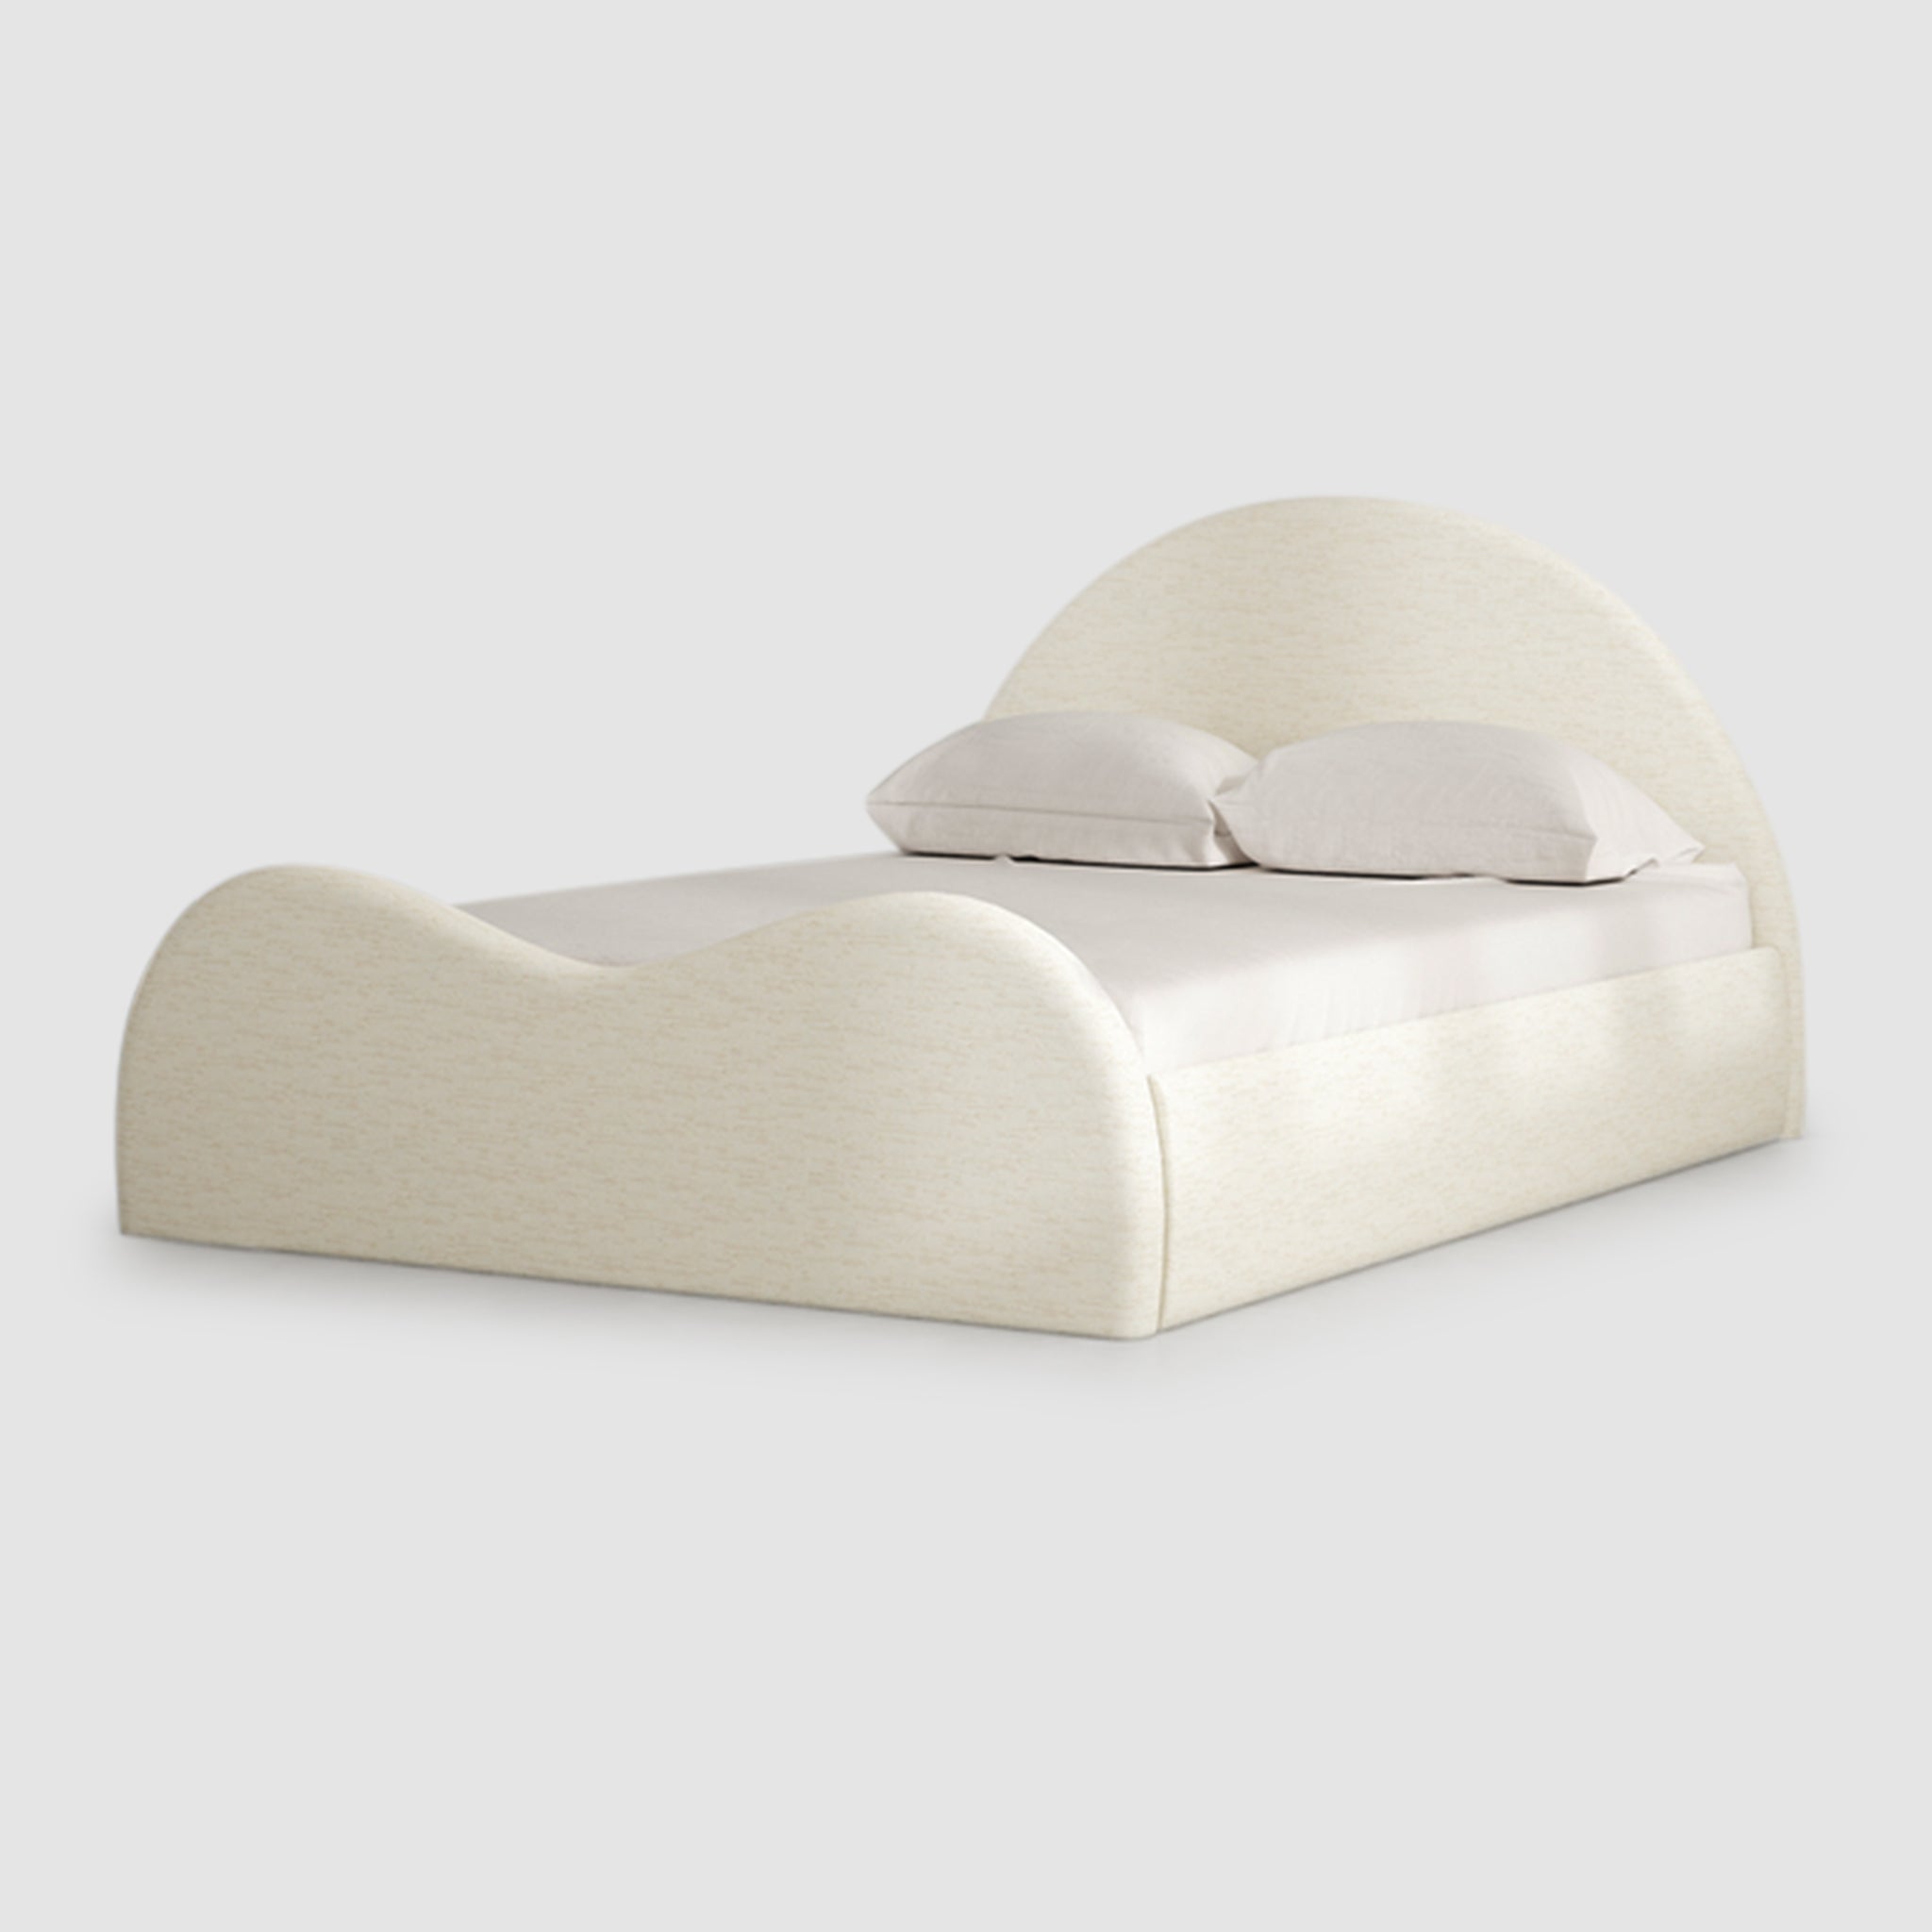 The Dolly Bed in stylish white, showcasing its playful curves.